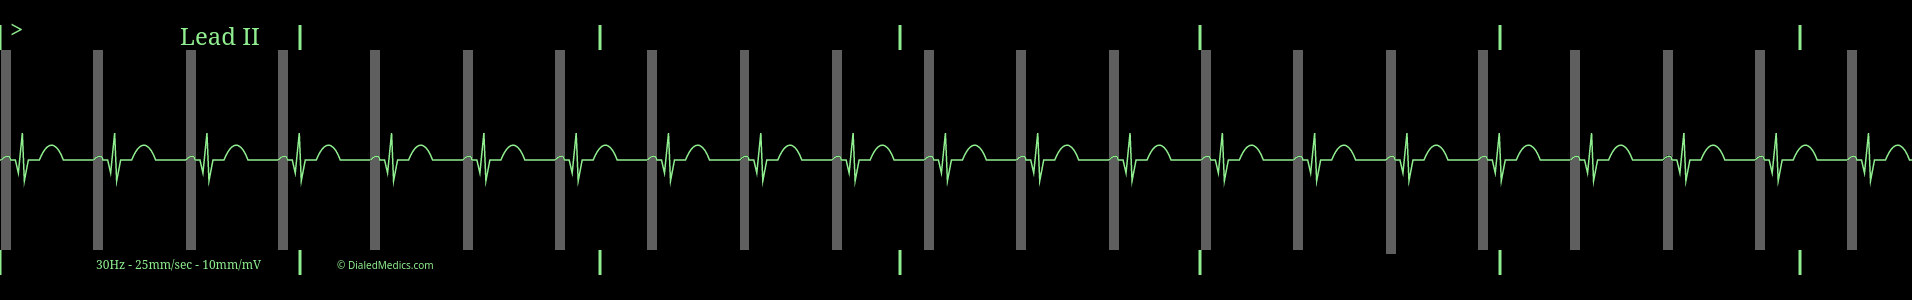 ECG monitor screen capture of Regular Sinus Rhythm with highlighted P waves and a HR of 65.